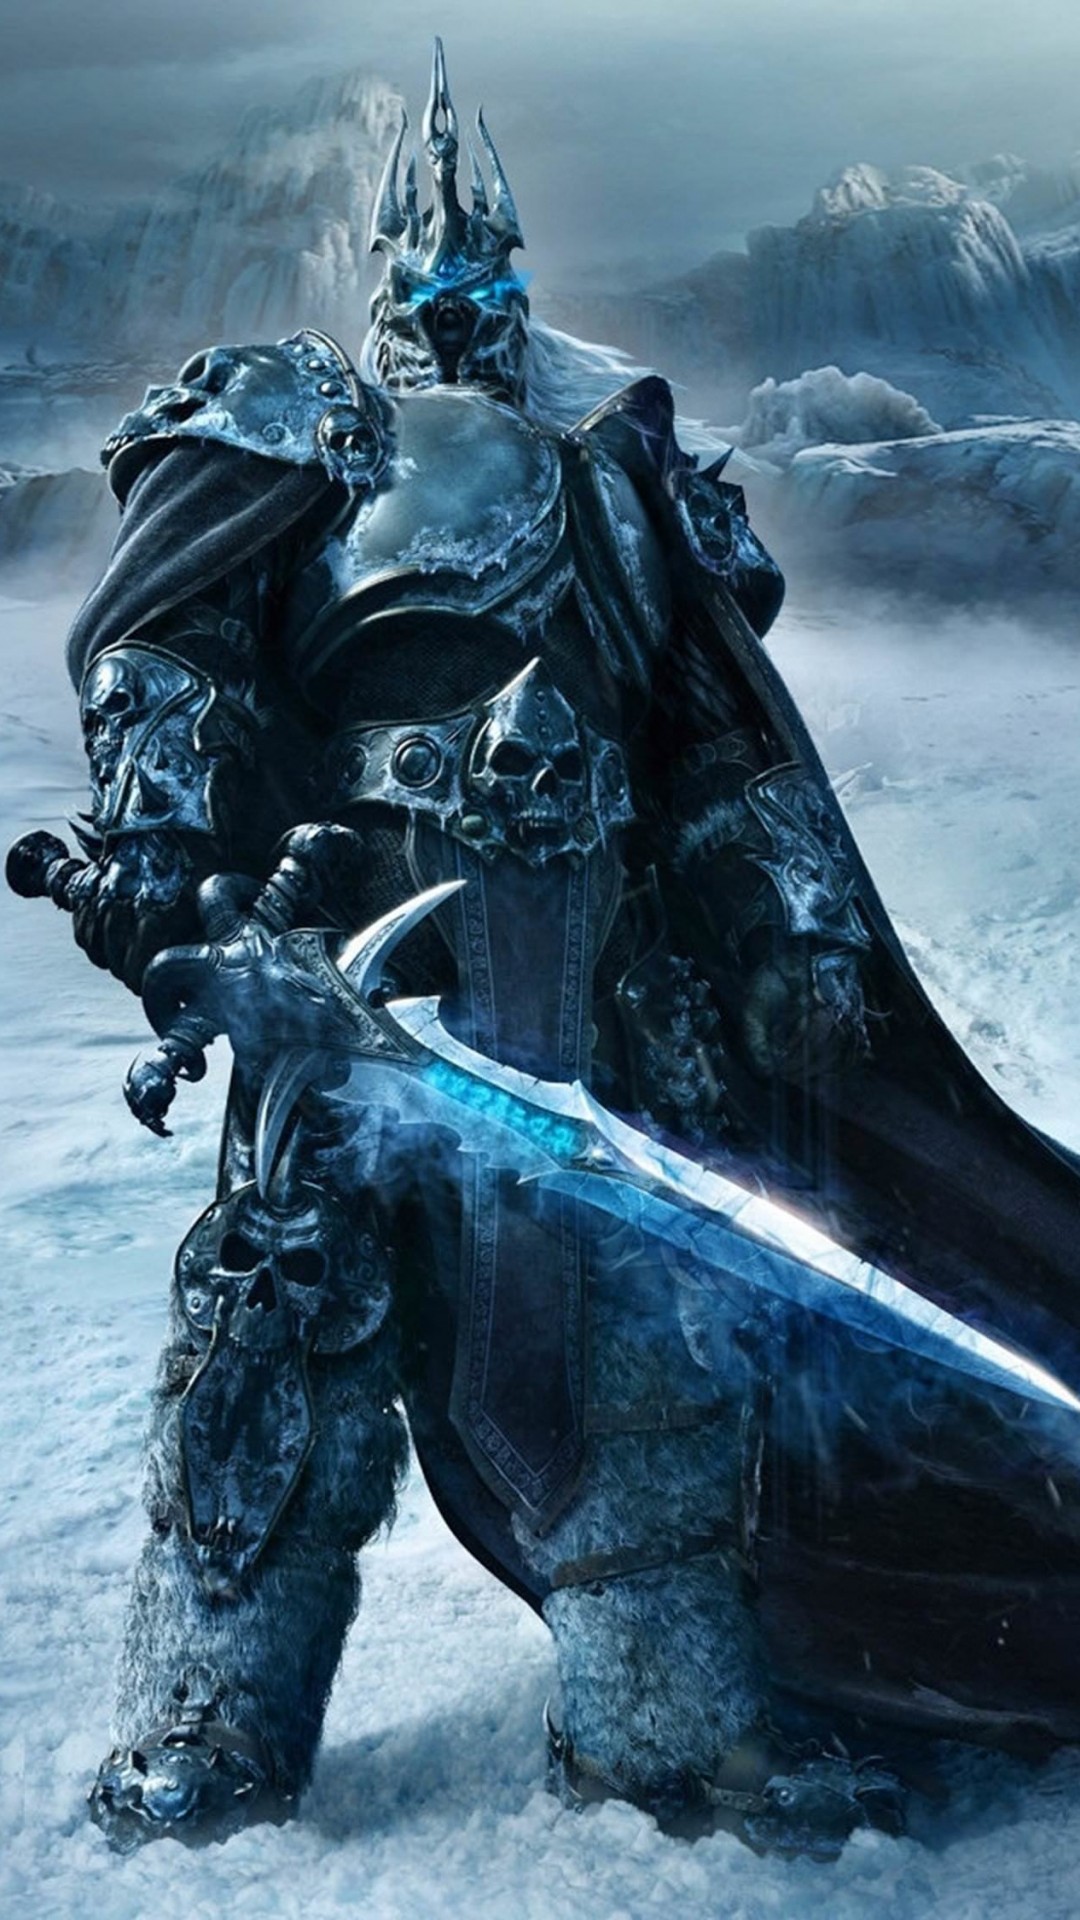 World of Warcraft: Wrath of the Lich King Wallpaper for SAMSUNG Galaxy S4